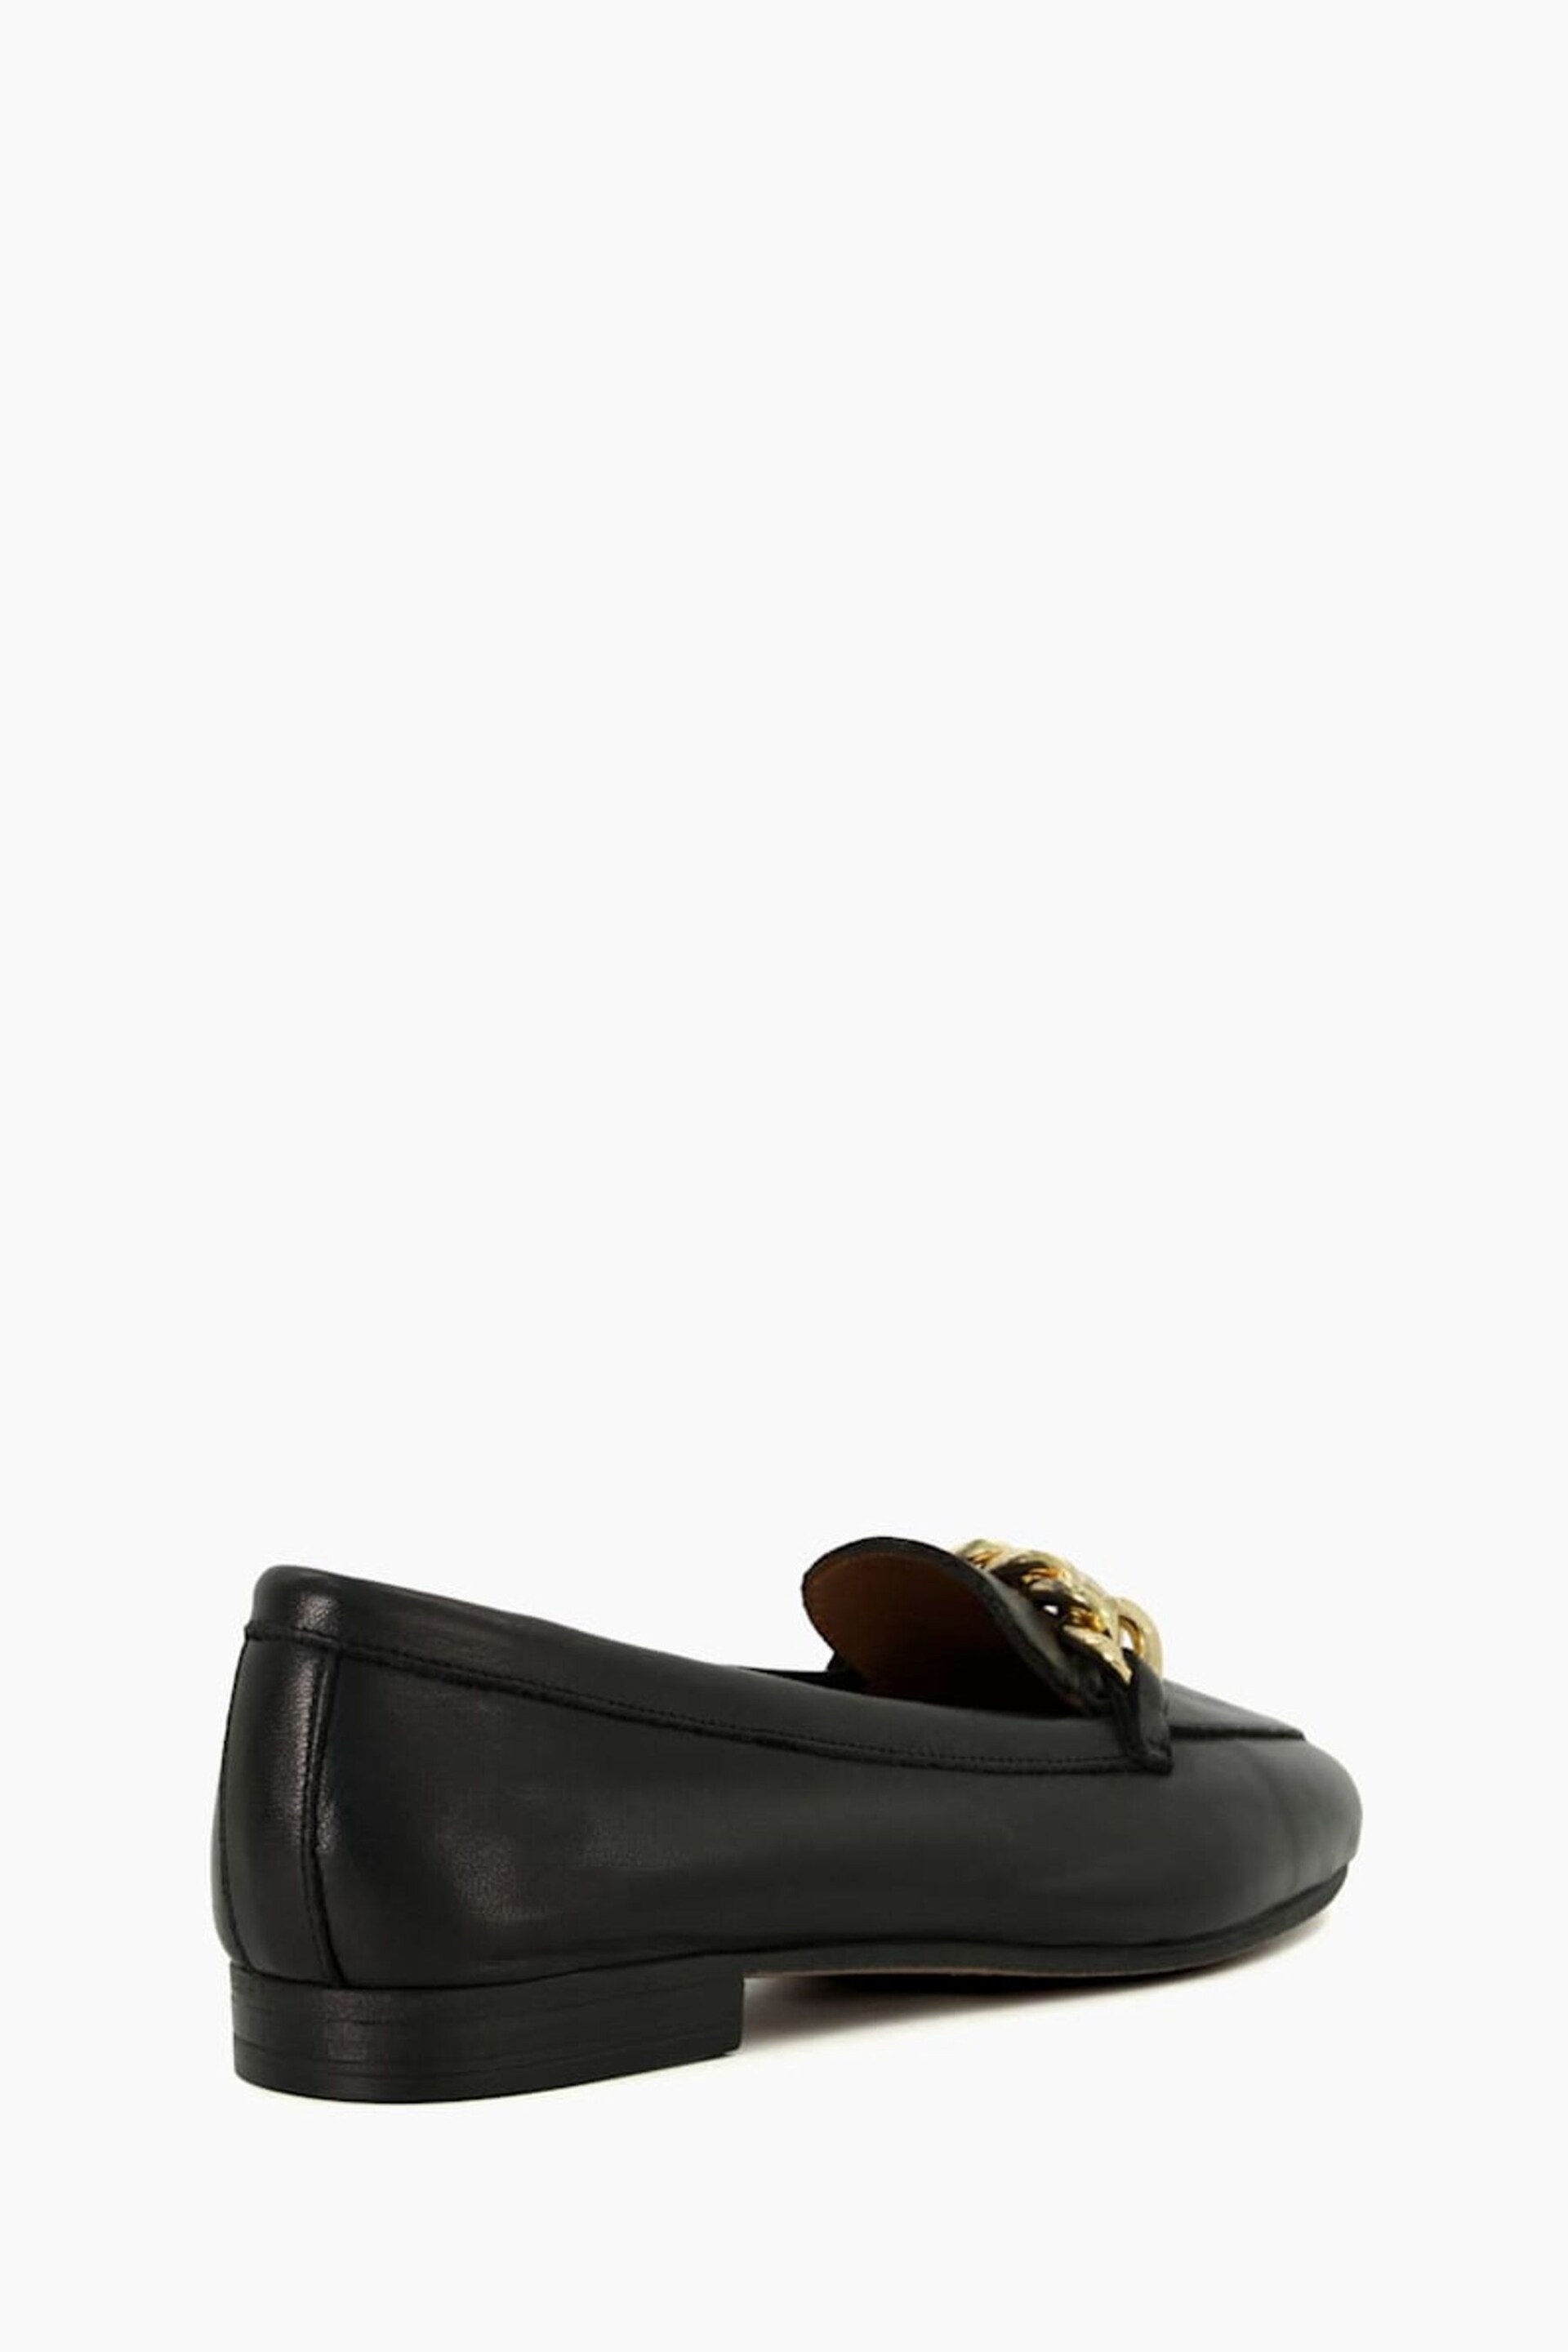 Dune London Black Chain Trim Smith Loafers - Image 3 of 5